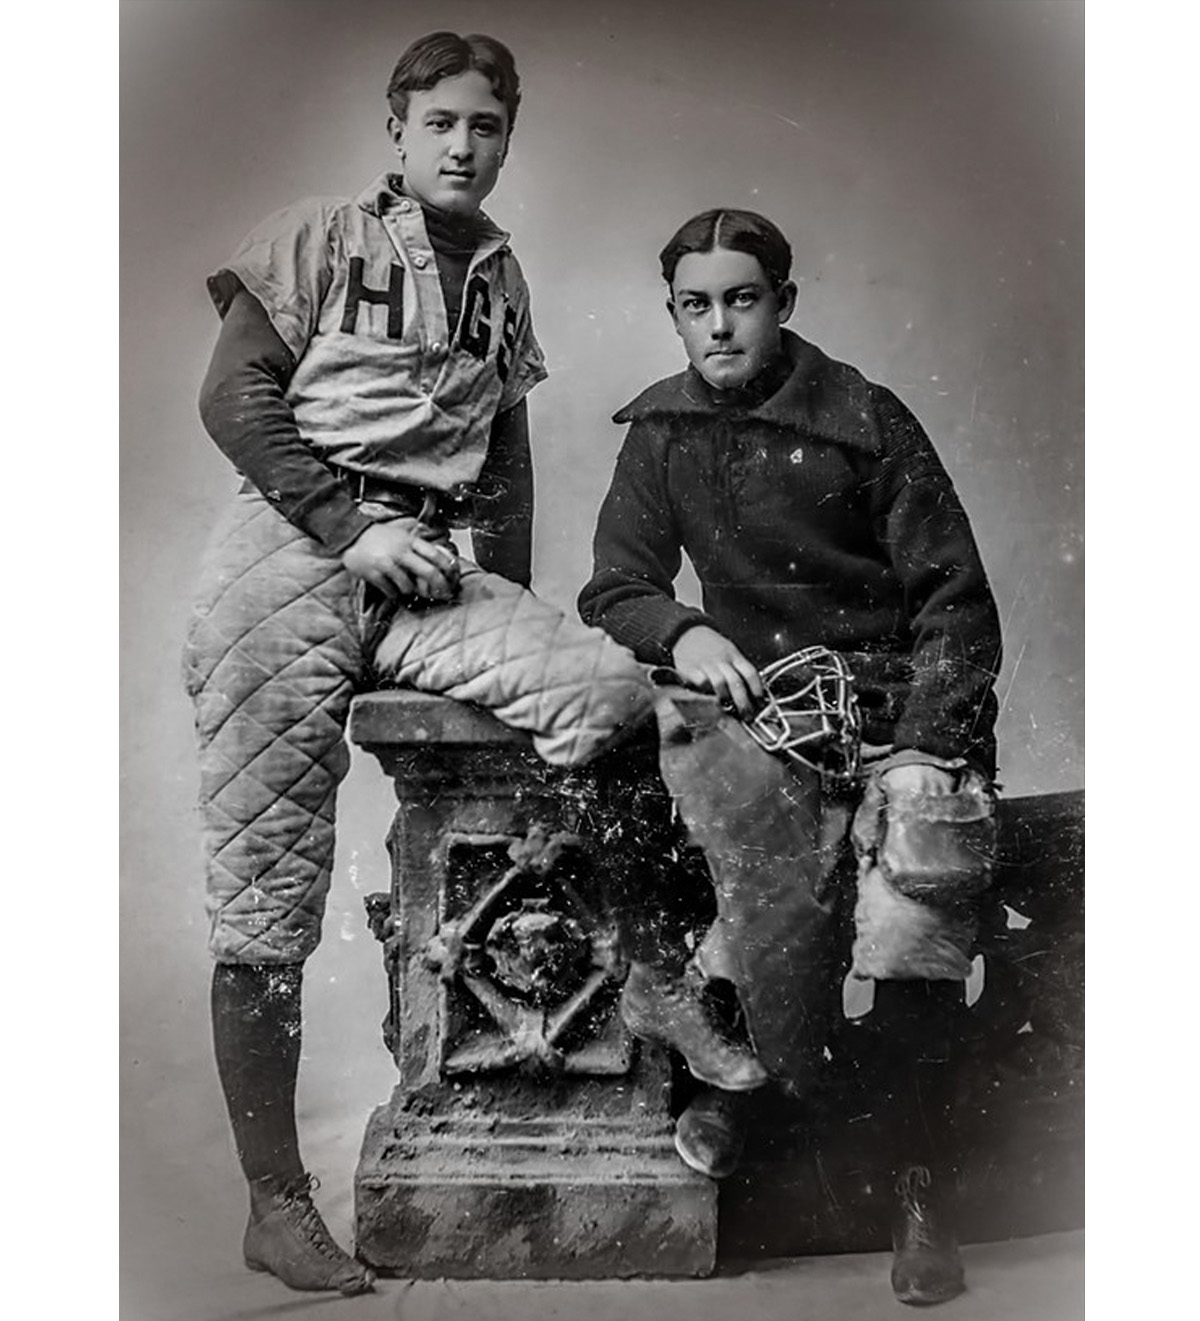 Charles Ives, left, captain of the baseball team and pitcher for Hopkins Grammar School, aged 18 (c. 1893)